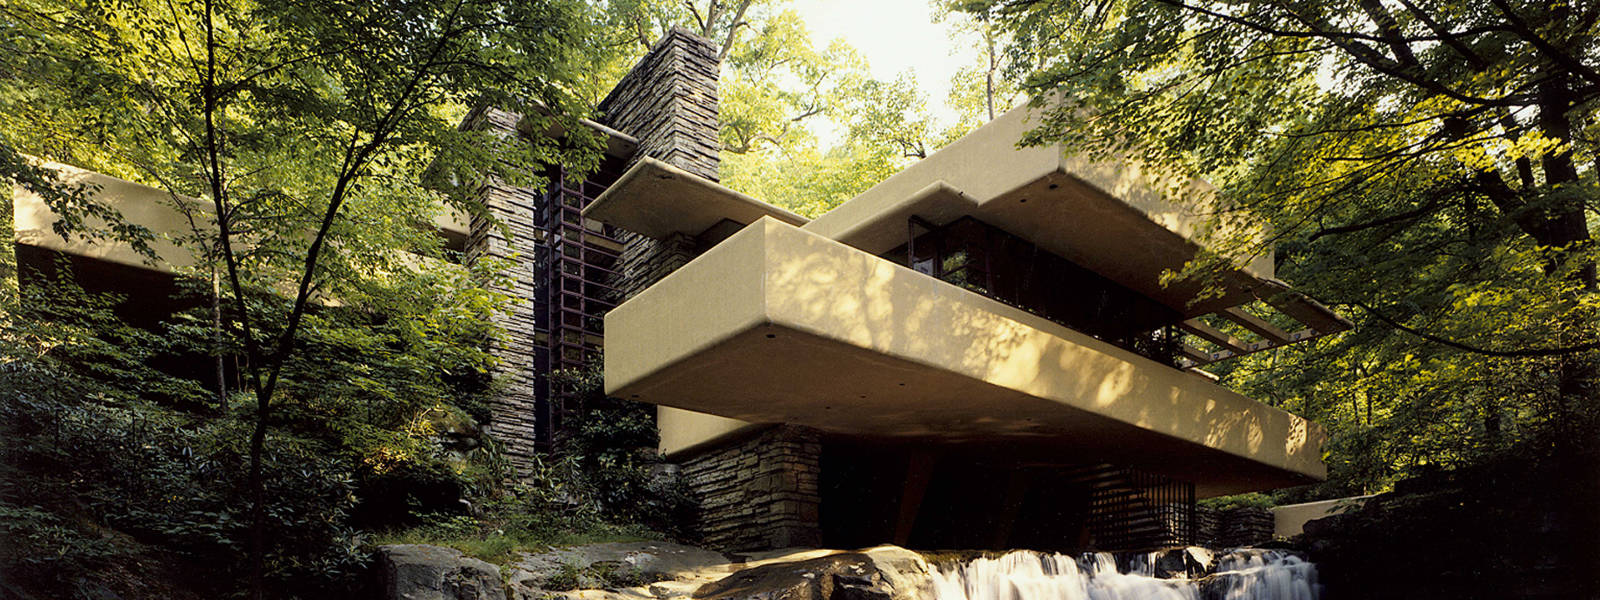 Become a Friend of Fallingwater